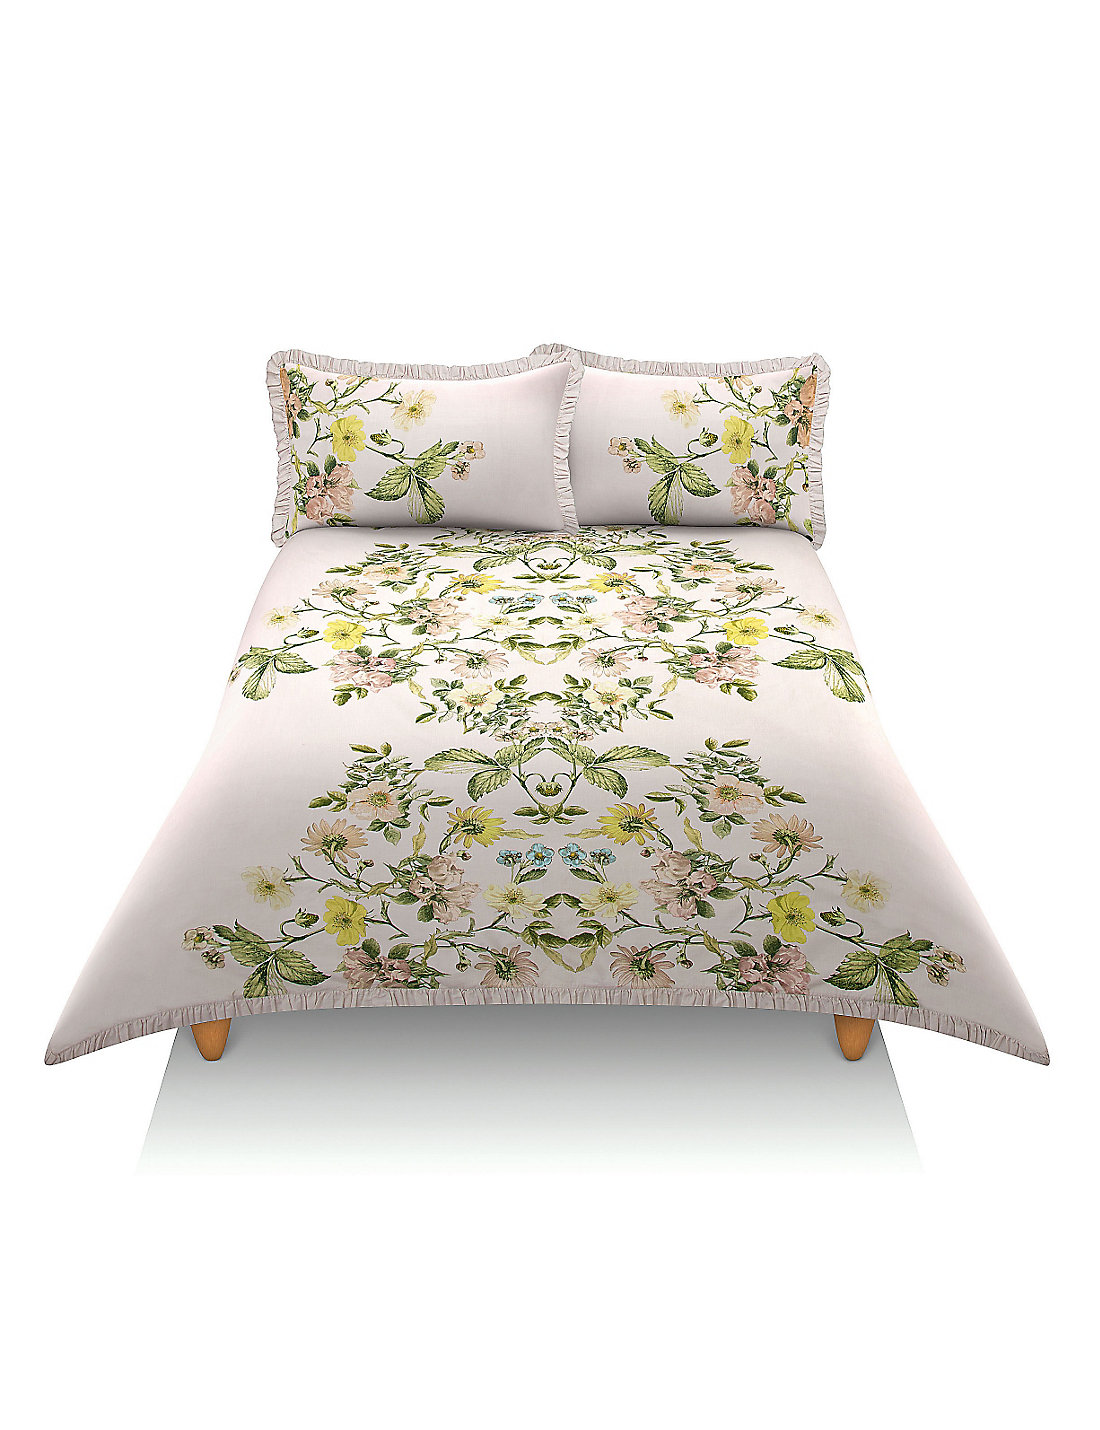 What types of bedding sets are sold at Linens N Things?